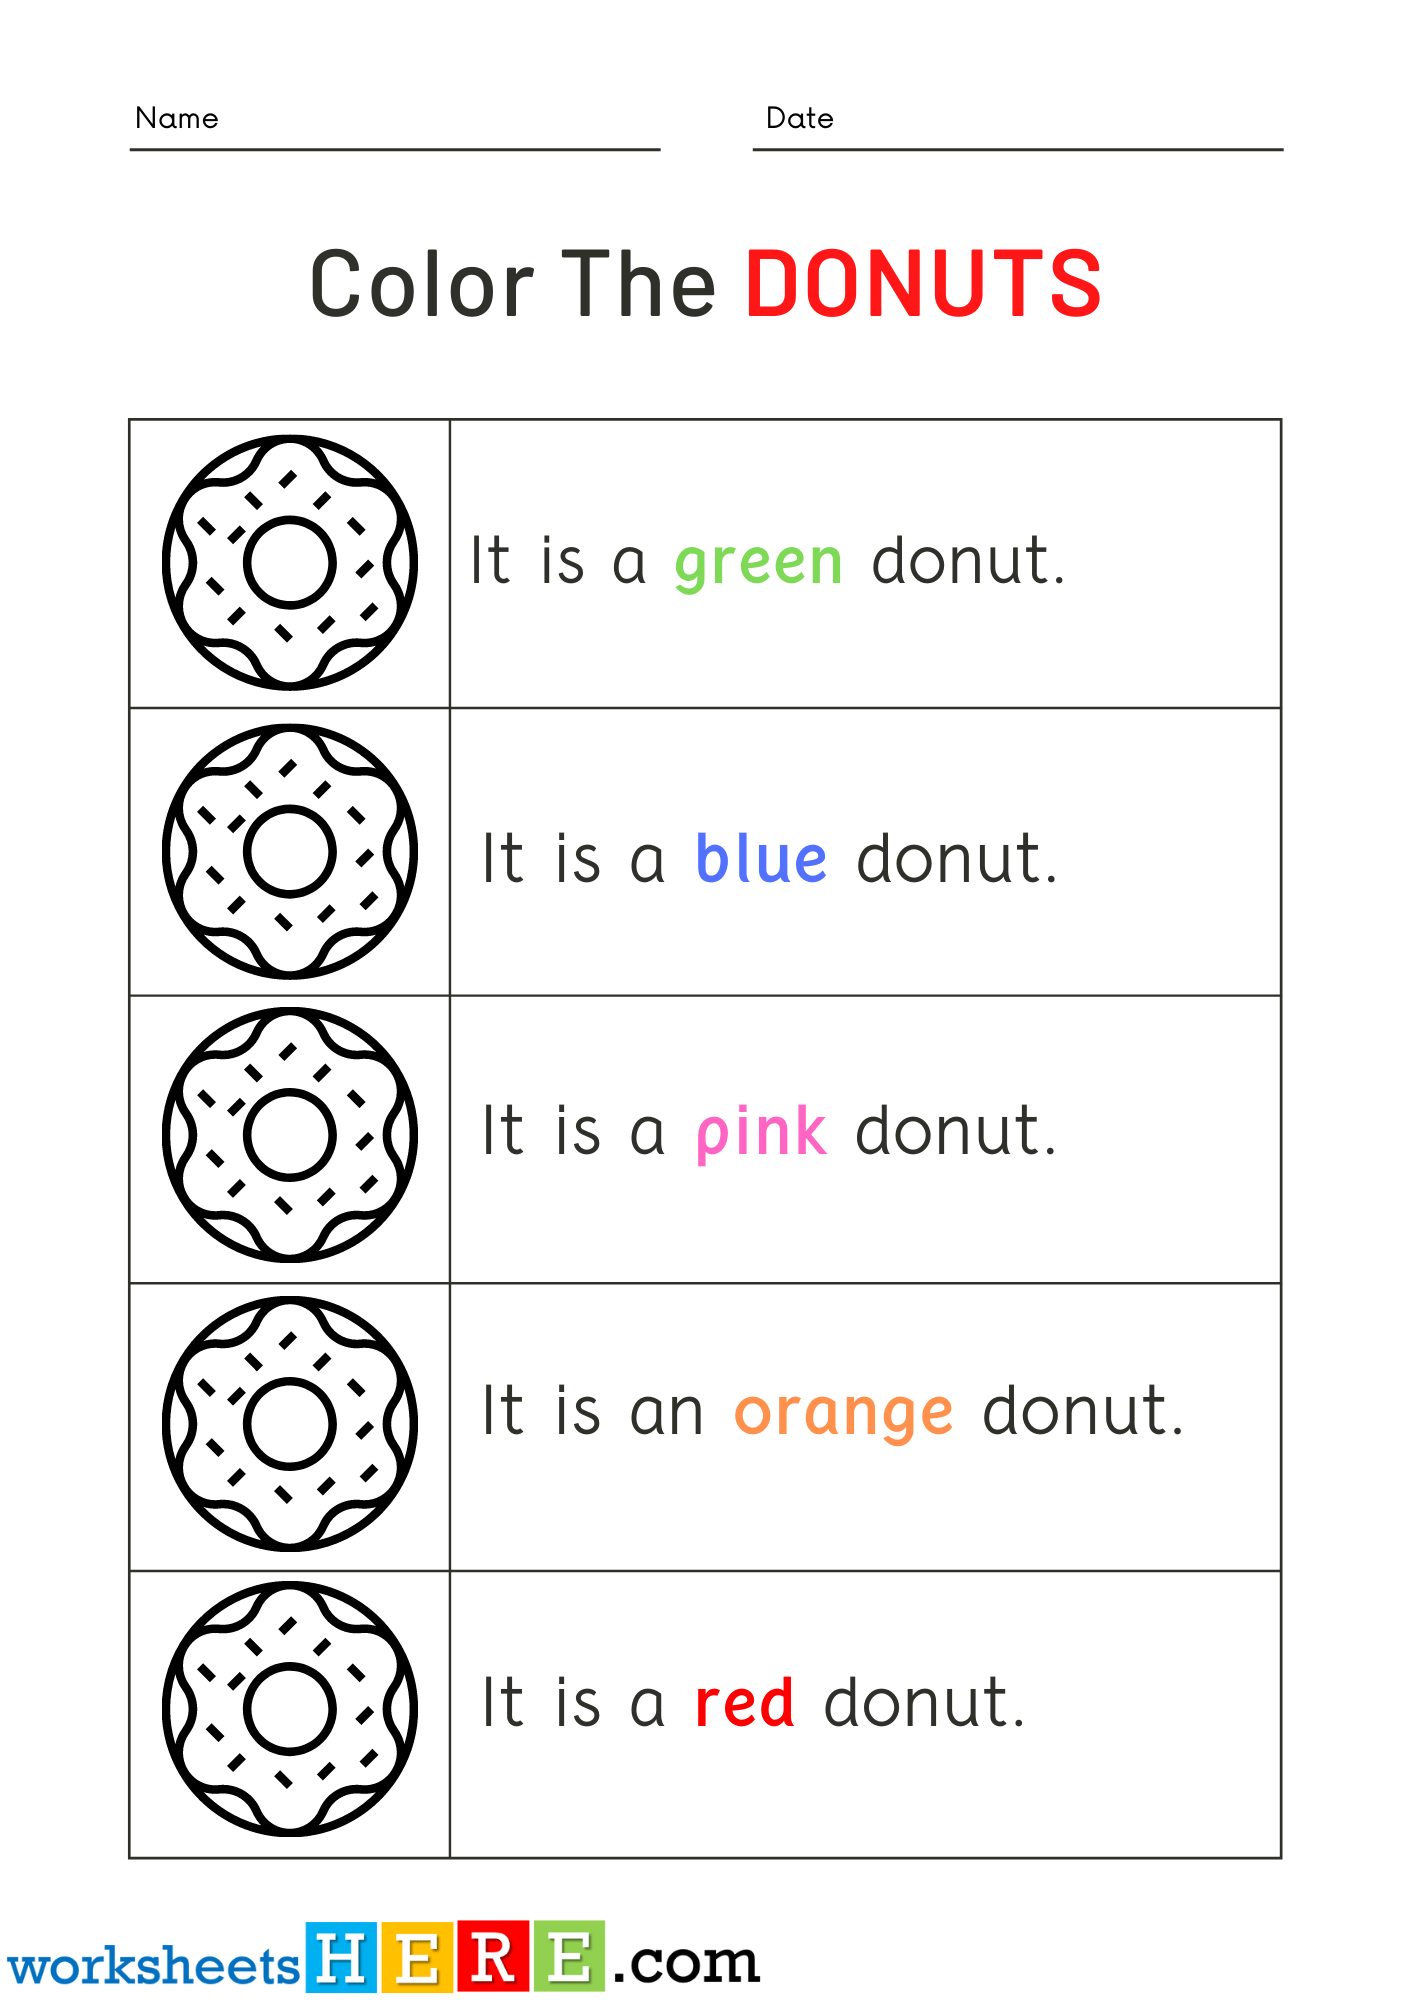 Read Words and Color Donuts Pictures Activity PDF Worksheets For Kindergarten